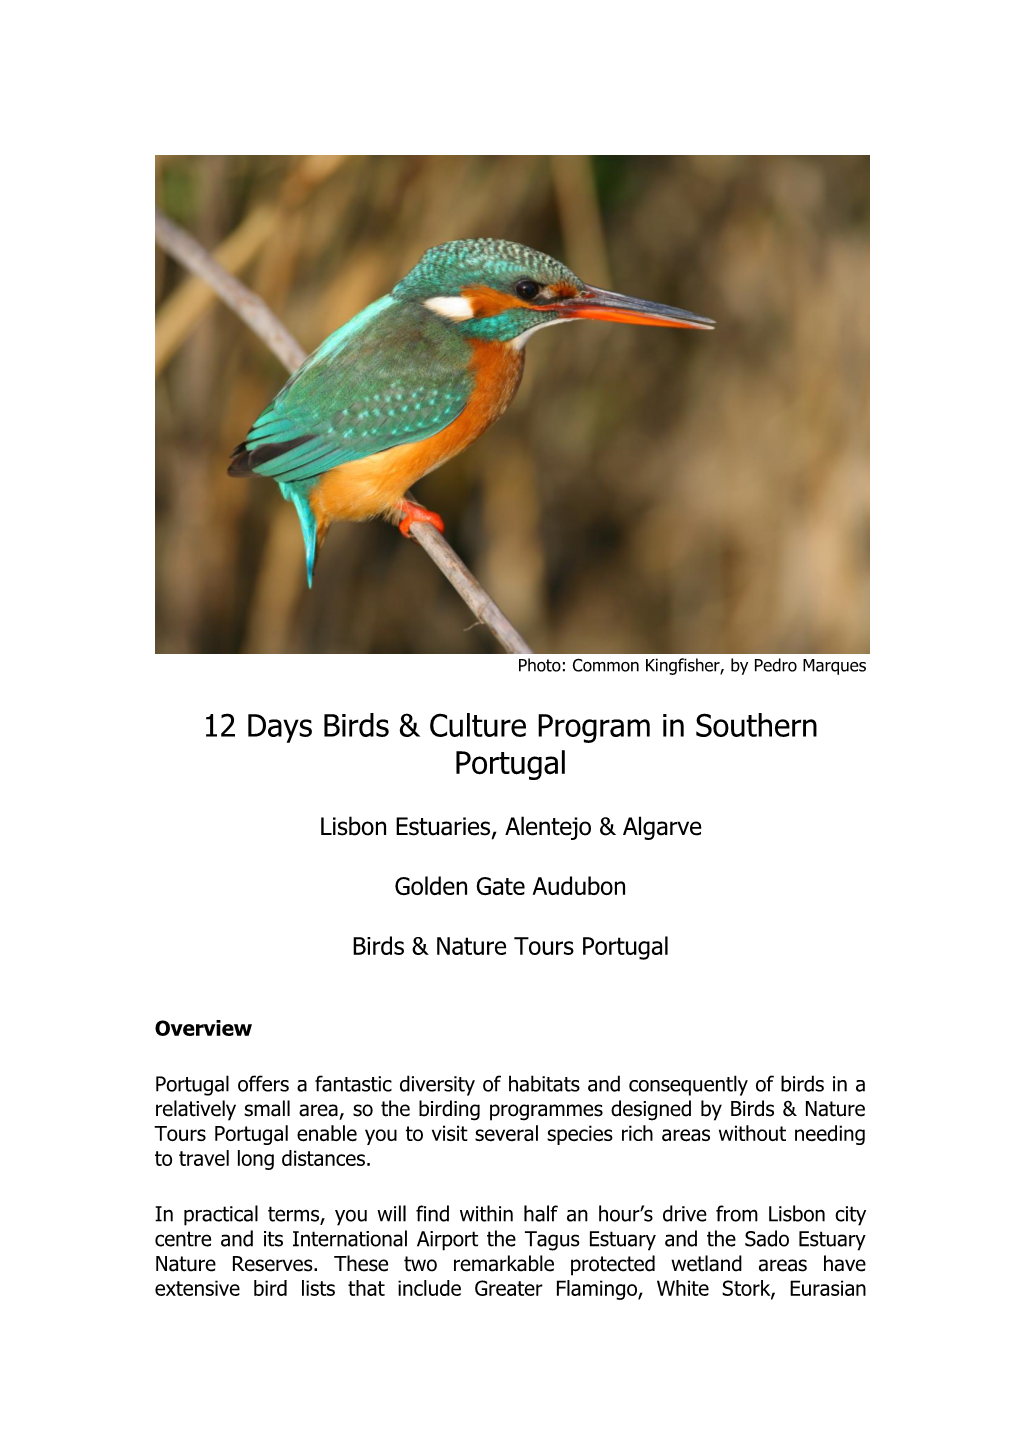 12 Days Birds & Culture Program in Southern Portugal